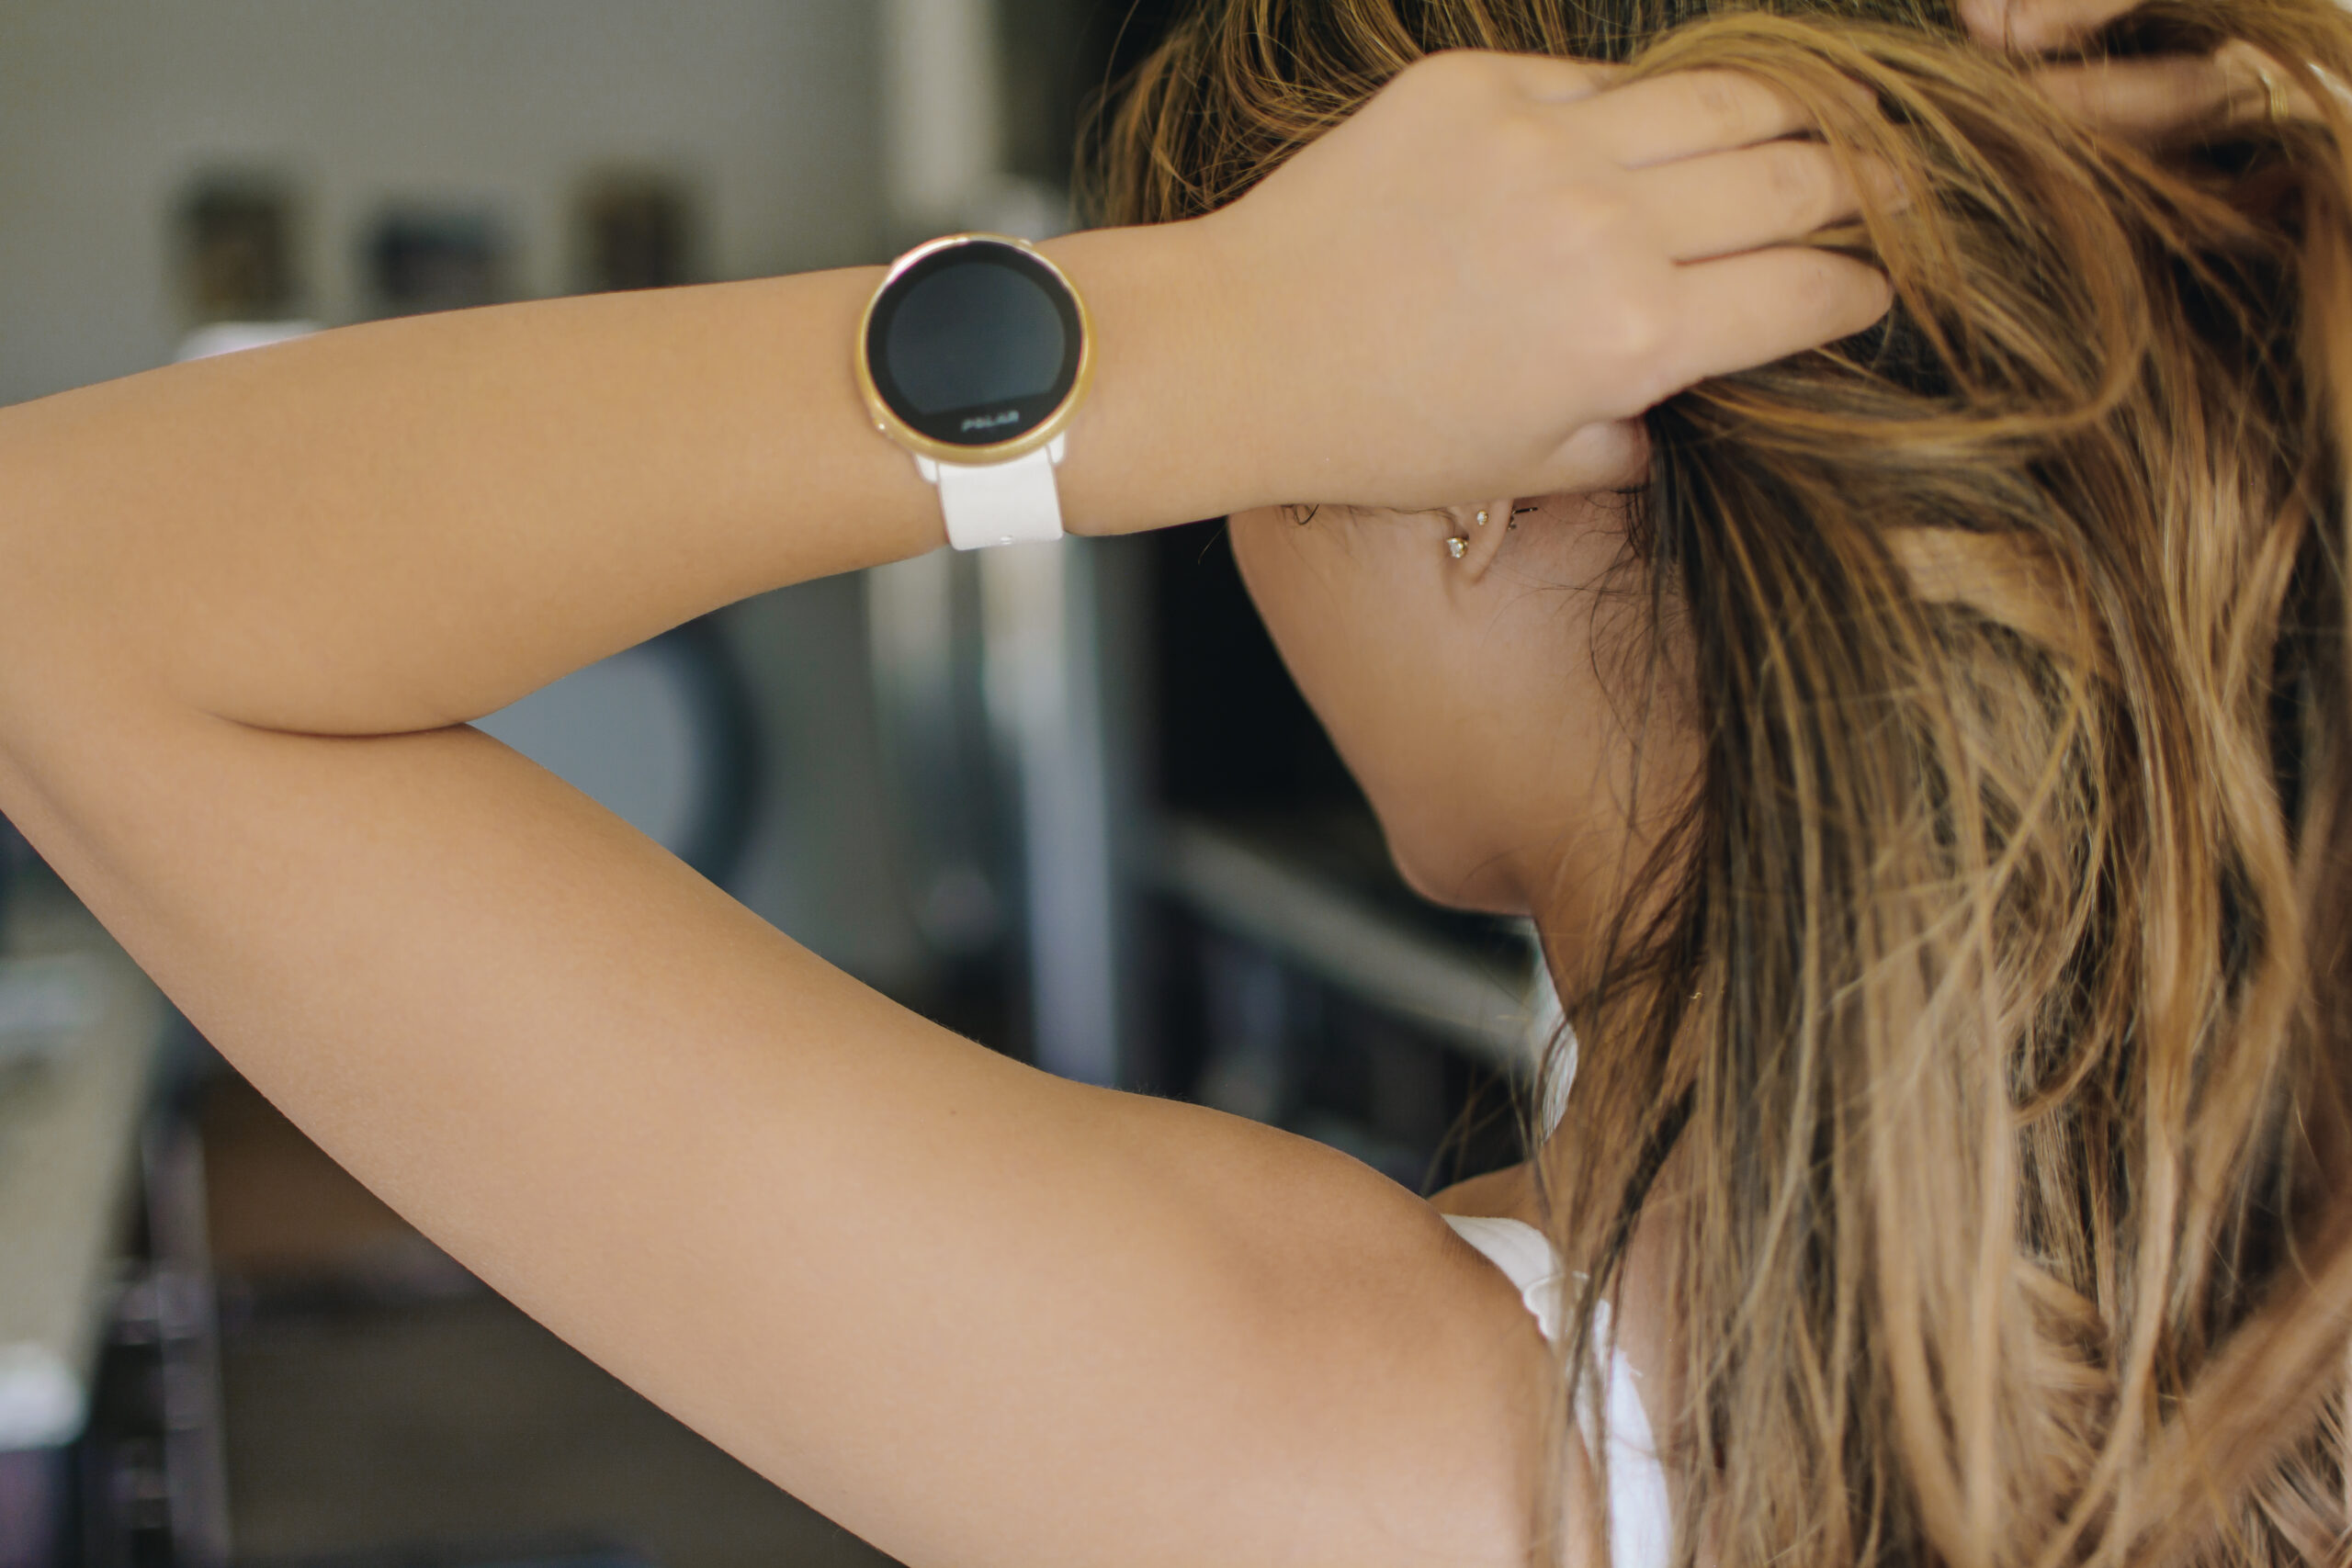 Polar Ignite 2 is a customizable fitness watch with smart features.